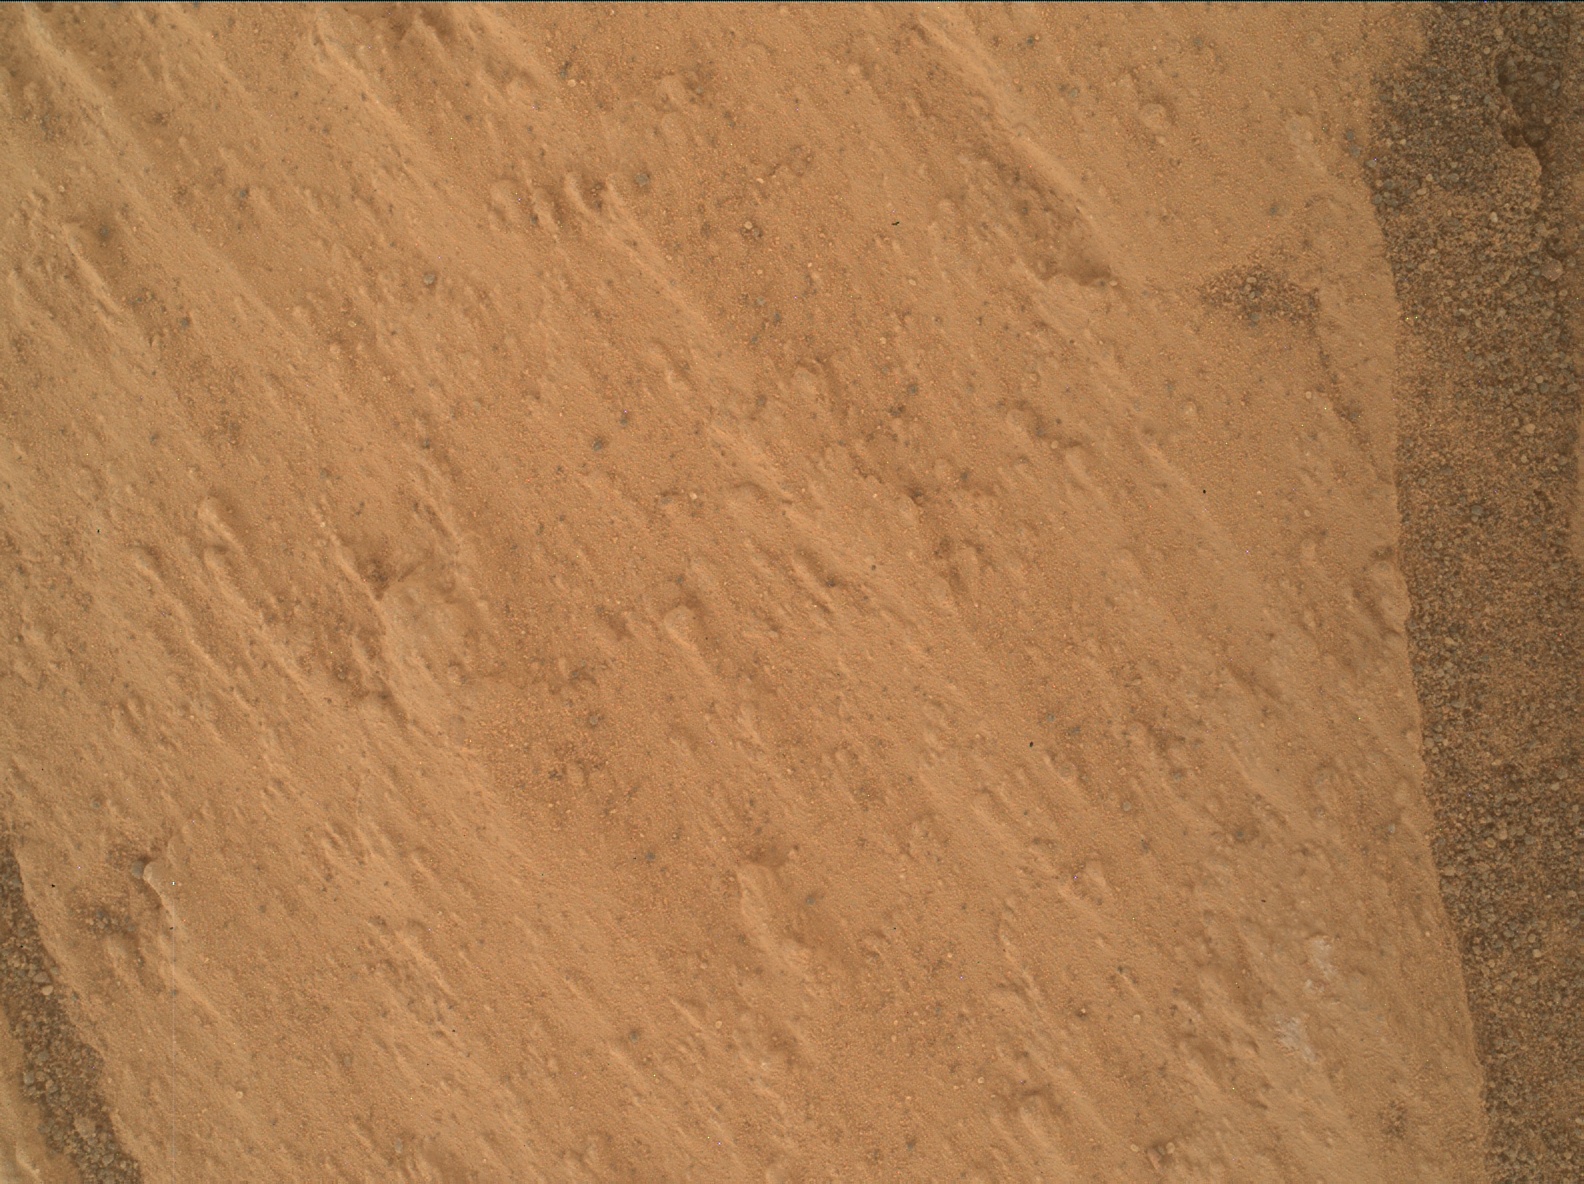 Nasa's Mars rover Curiosity acquired this image using its Mars Hand Lens Imager (MAHLI) on Sol 3328